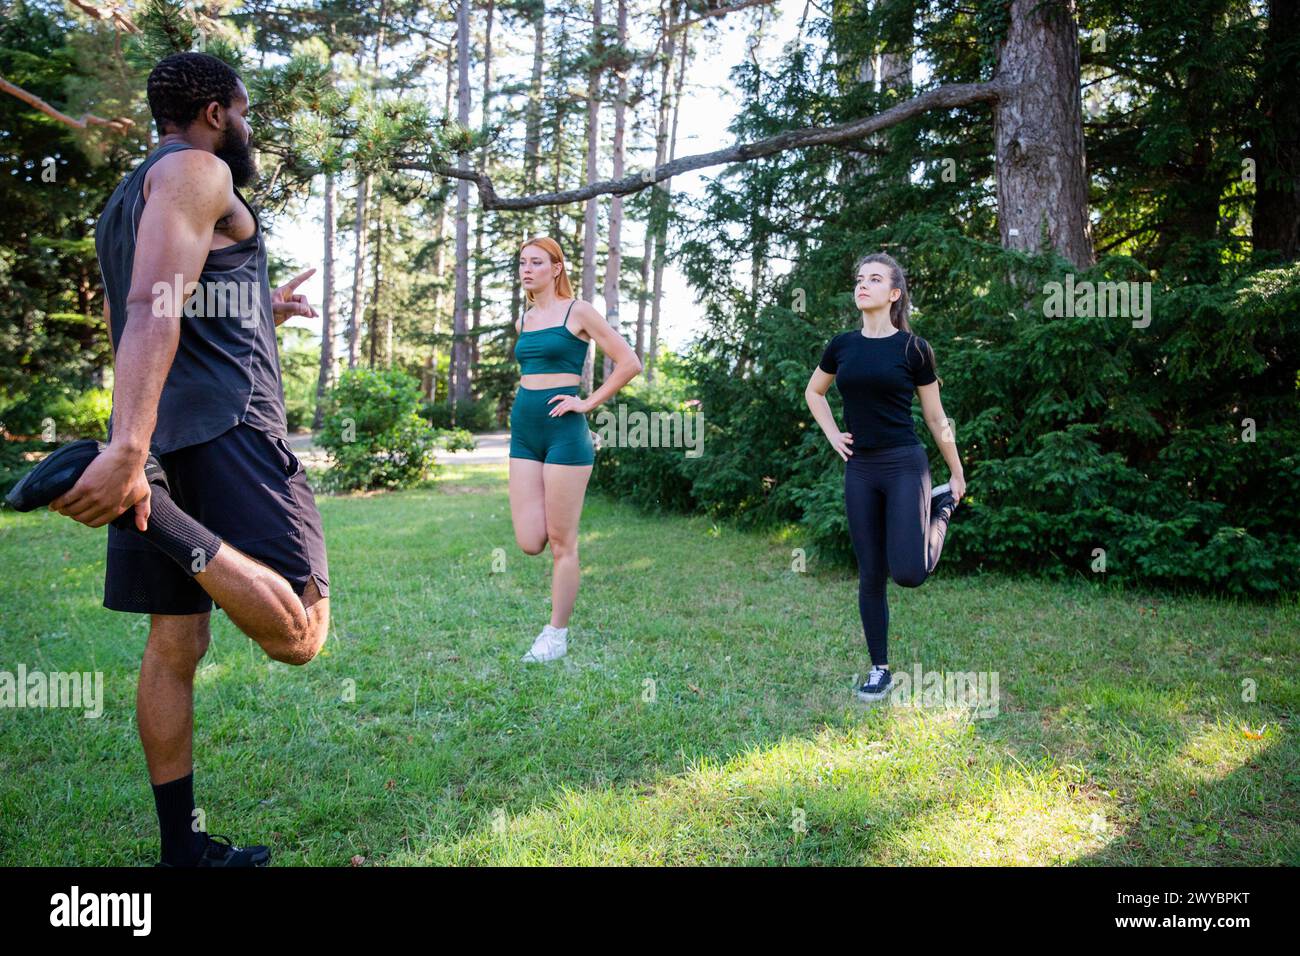 Three people are stretching in a park during a workout together, healthy lifestyle. Stock Photo